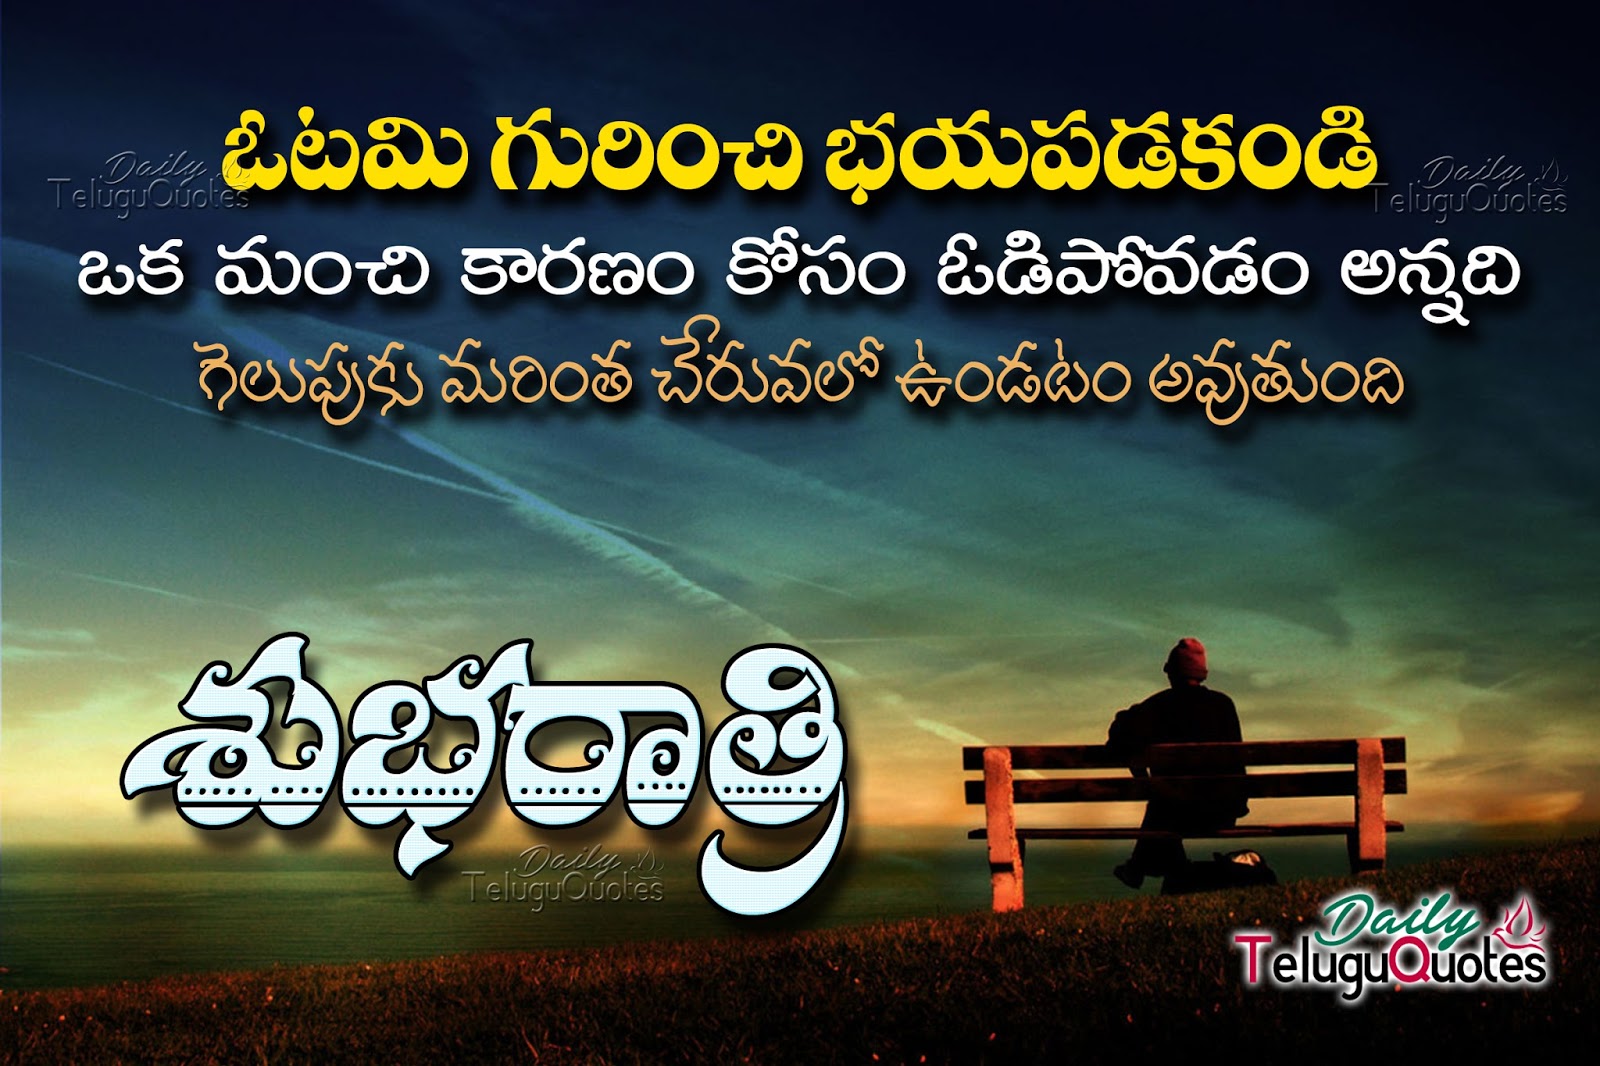 good night telugu quotes greetings wishes sms messages